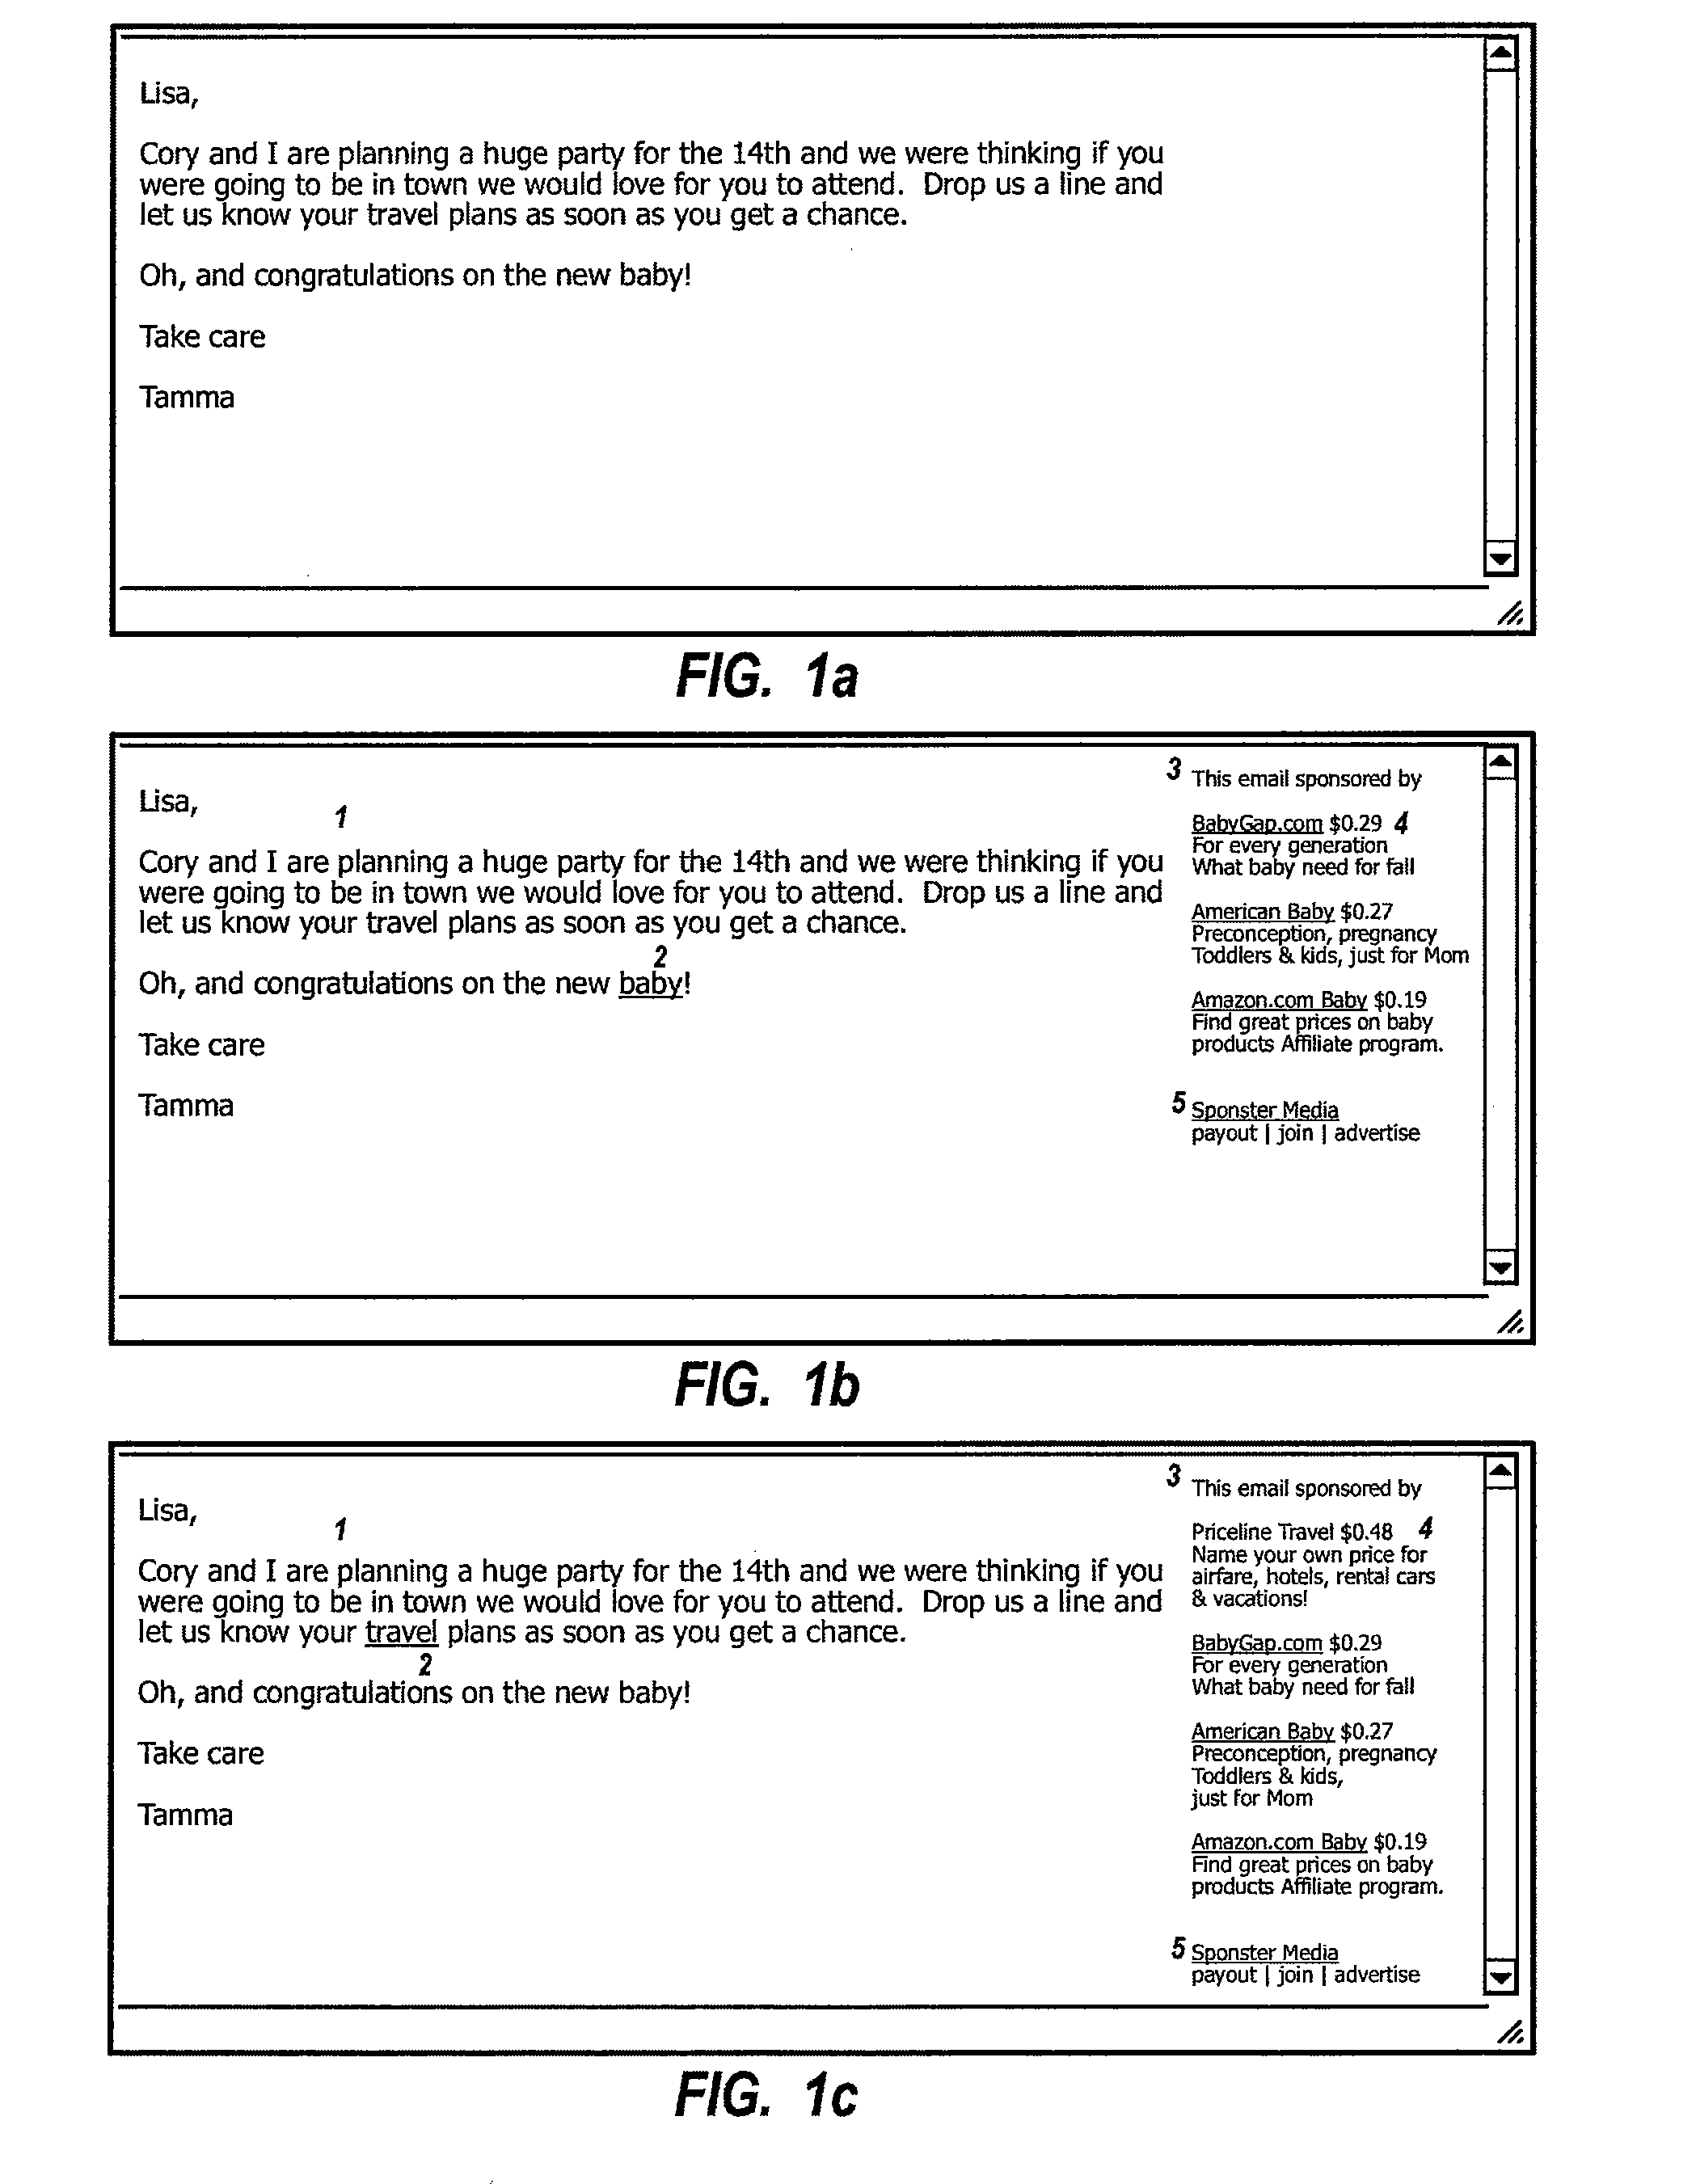 Method of enhancing email text with hyperlinked word pointing to targeted ad